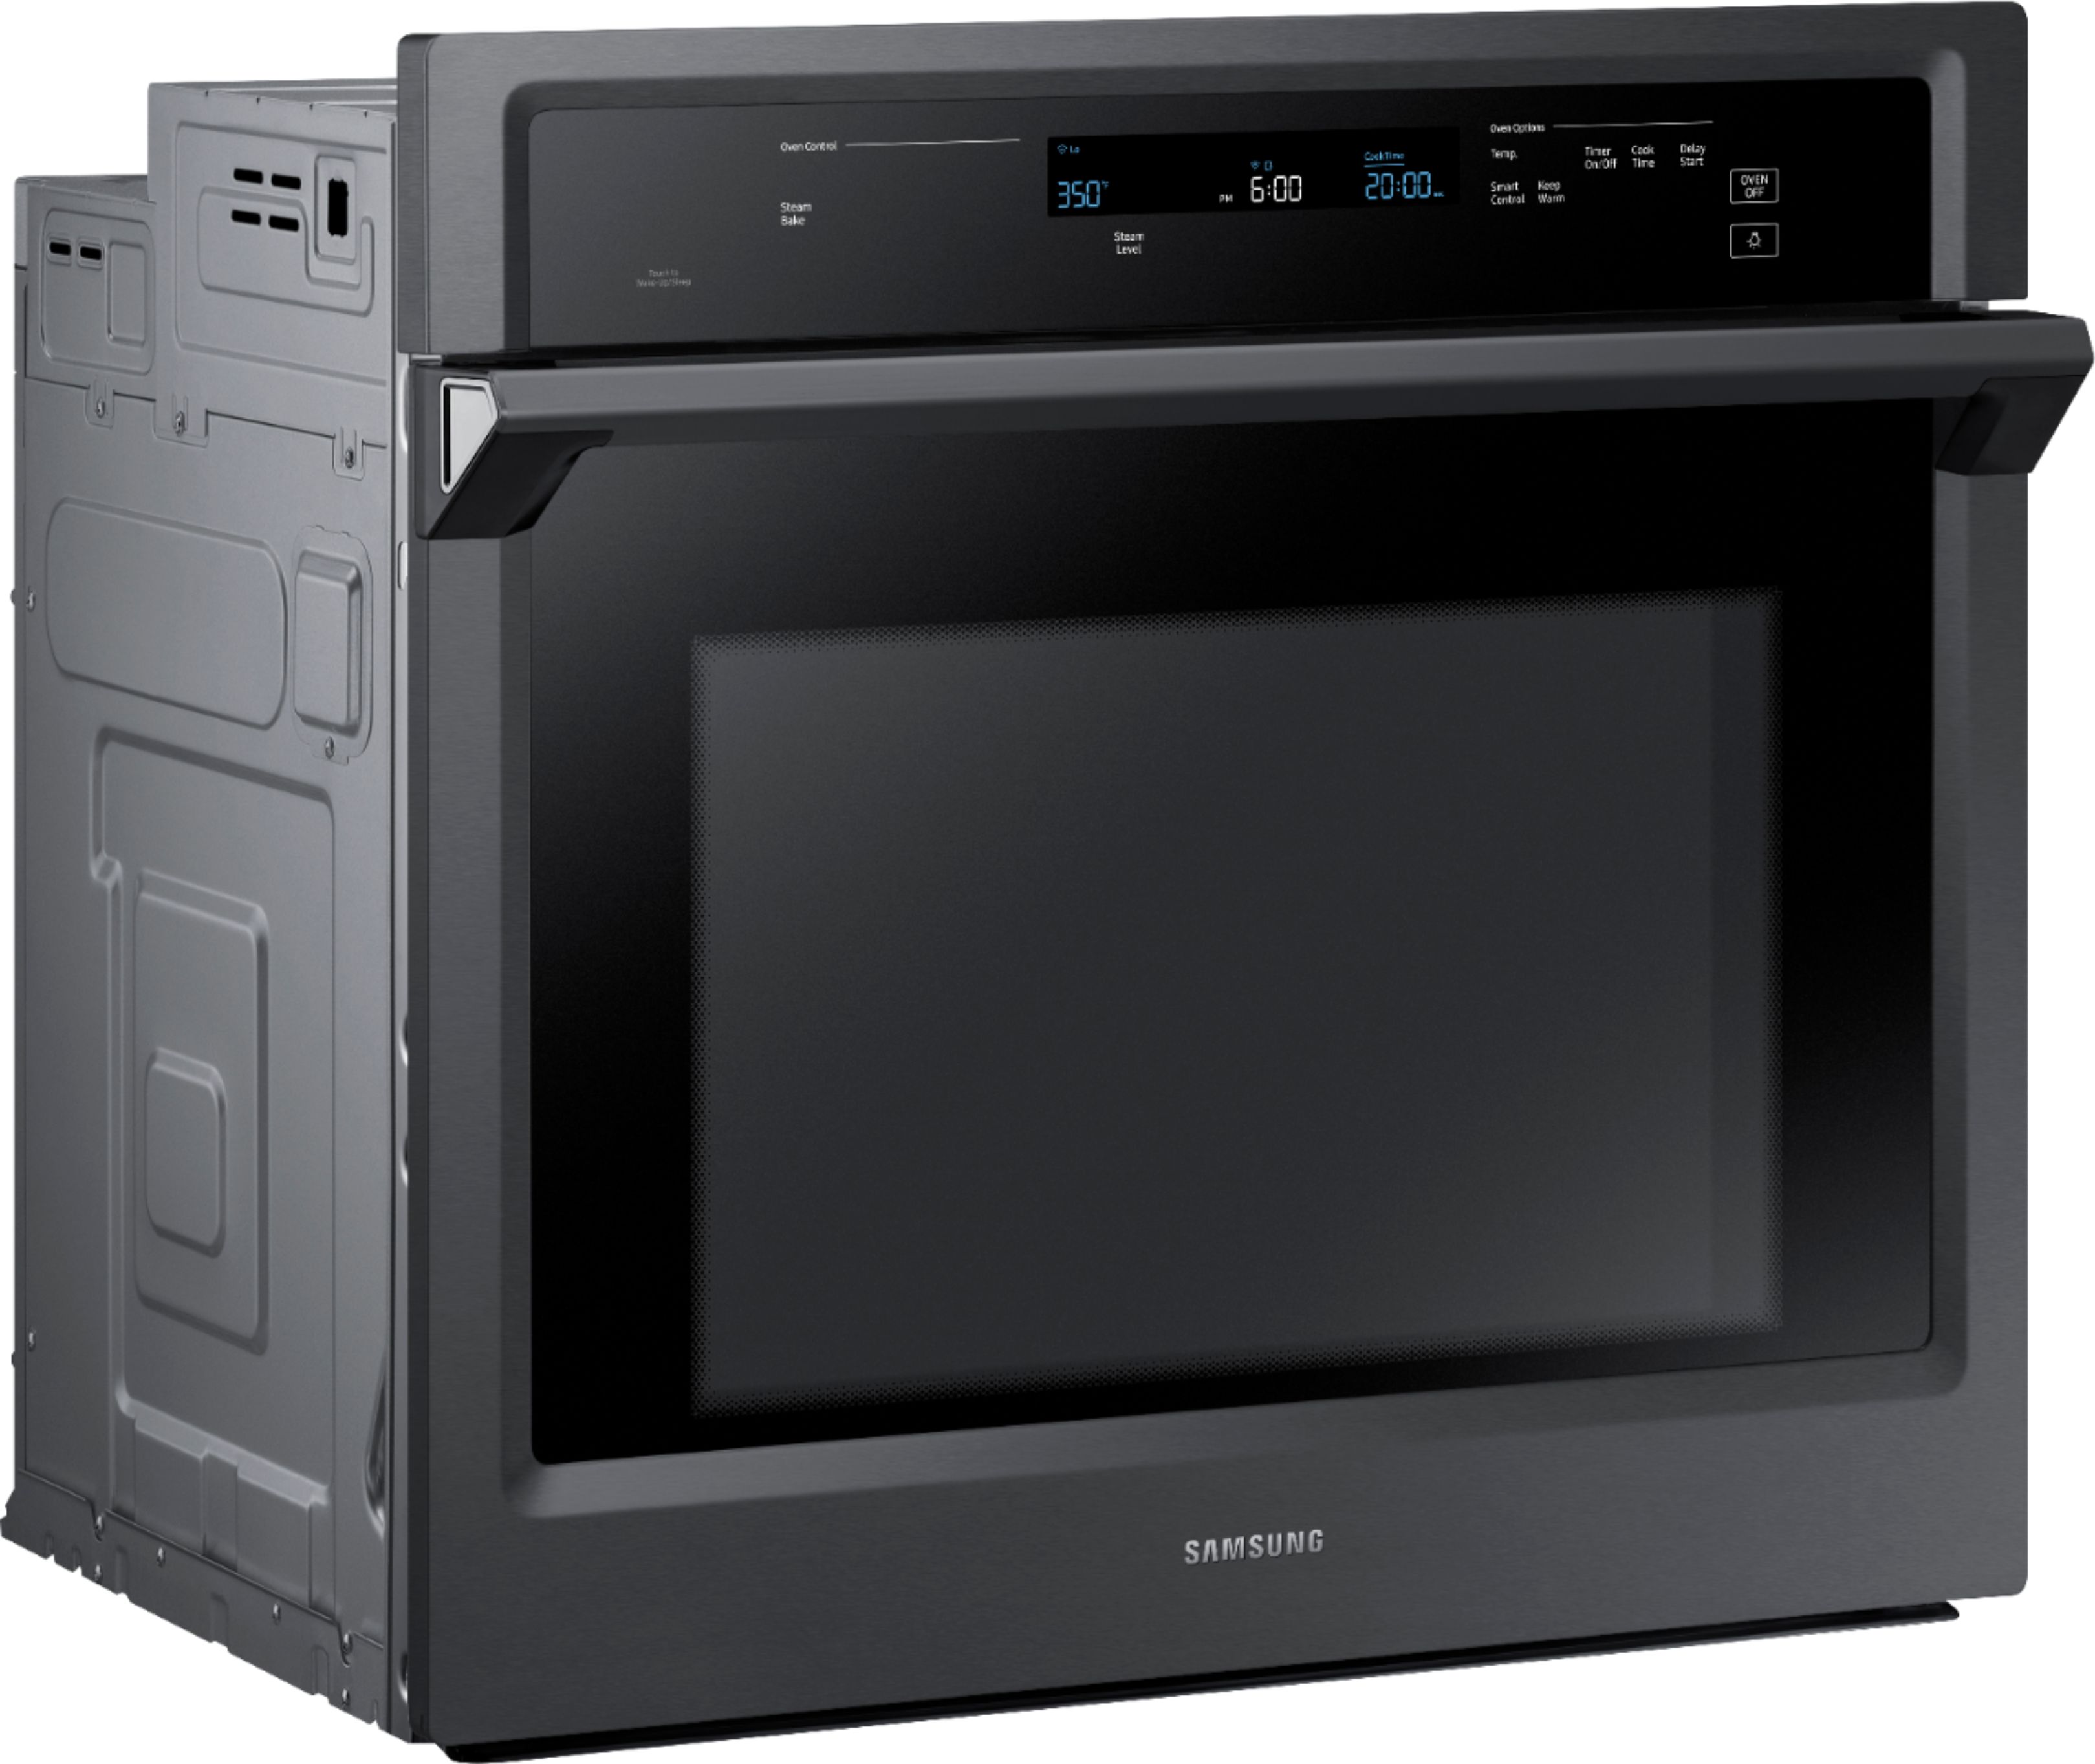 Angle View: Whirlpool - 30" Built-In Single Electric Wall Oven - Stainless Steel